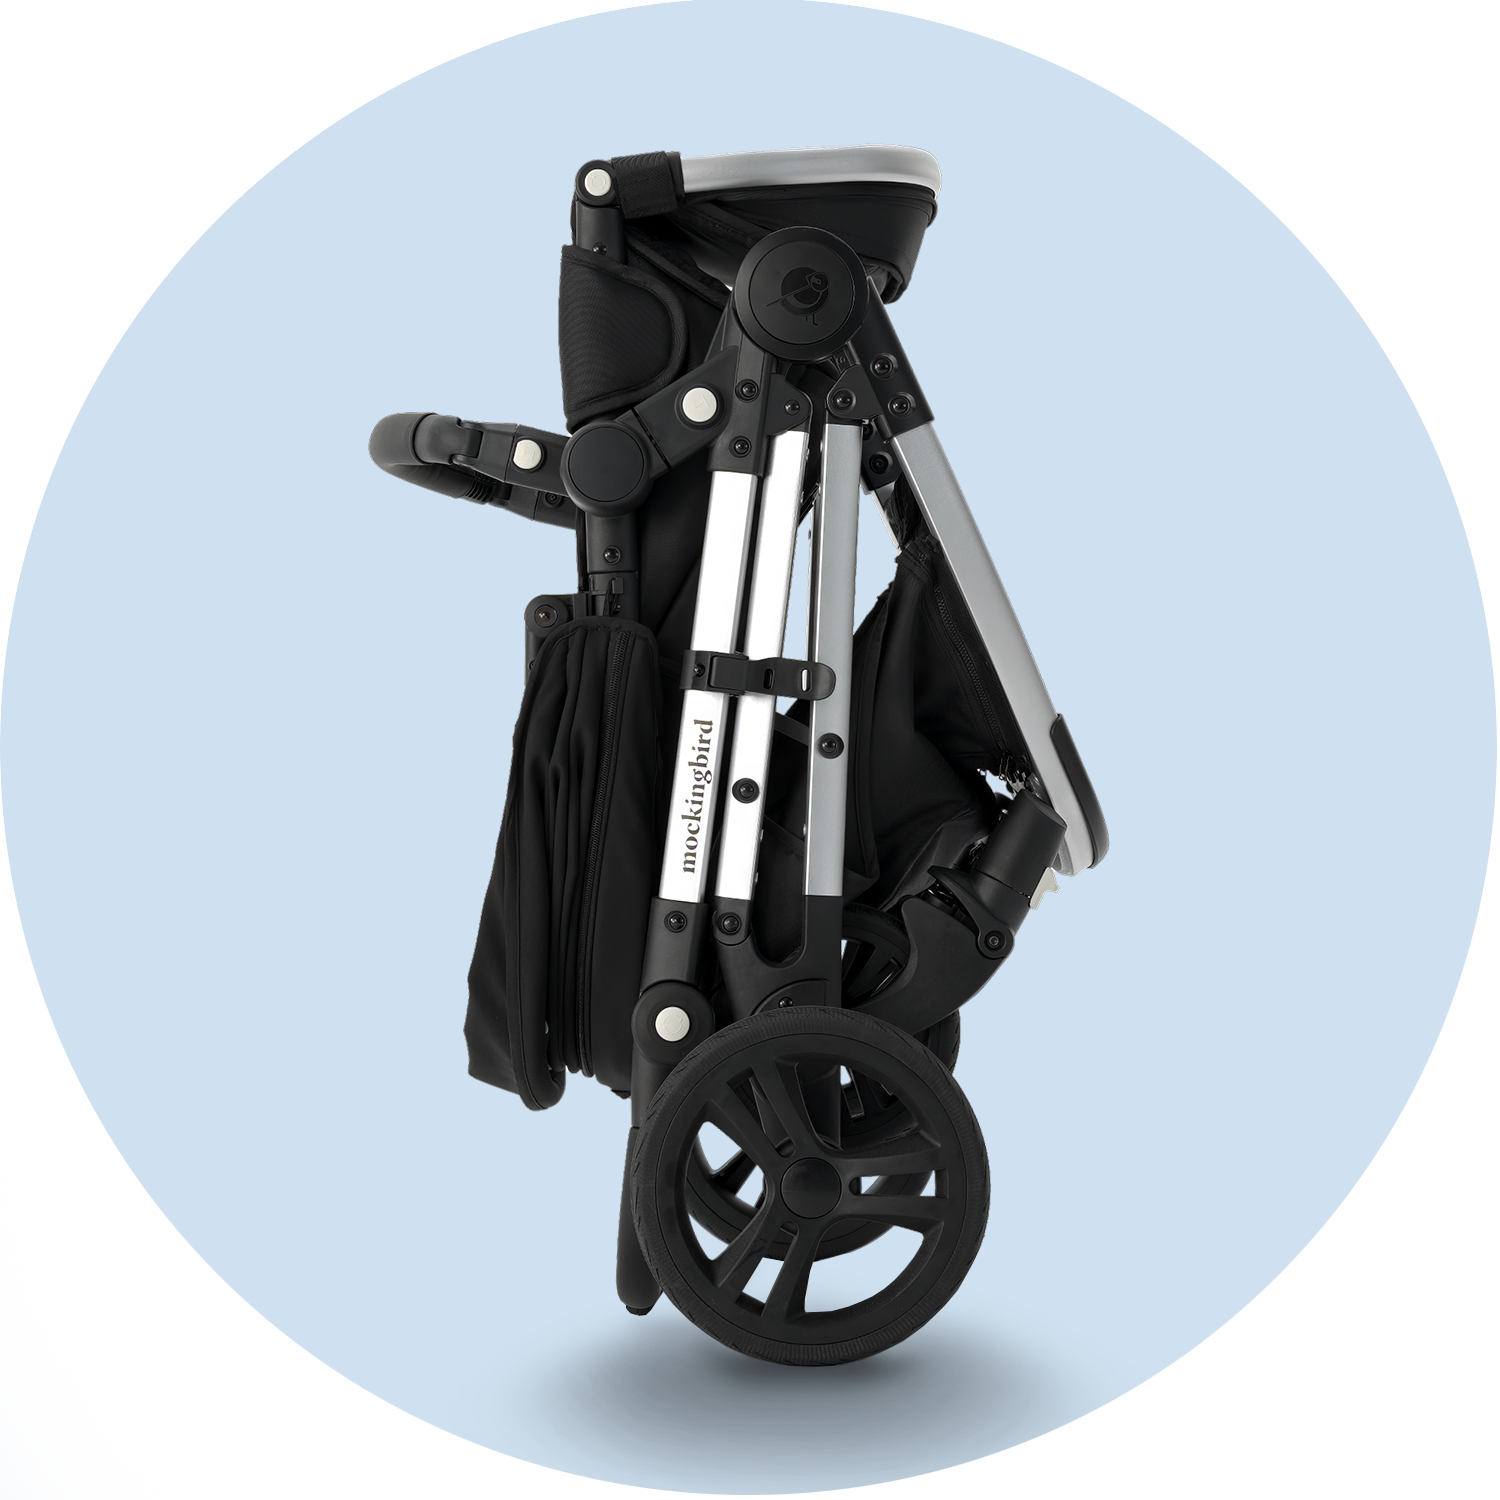 Black, foldable baby stroller against a light blue background, featuring large wheels and a storage compartment.